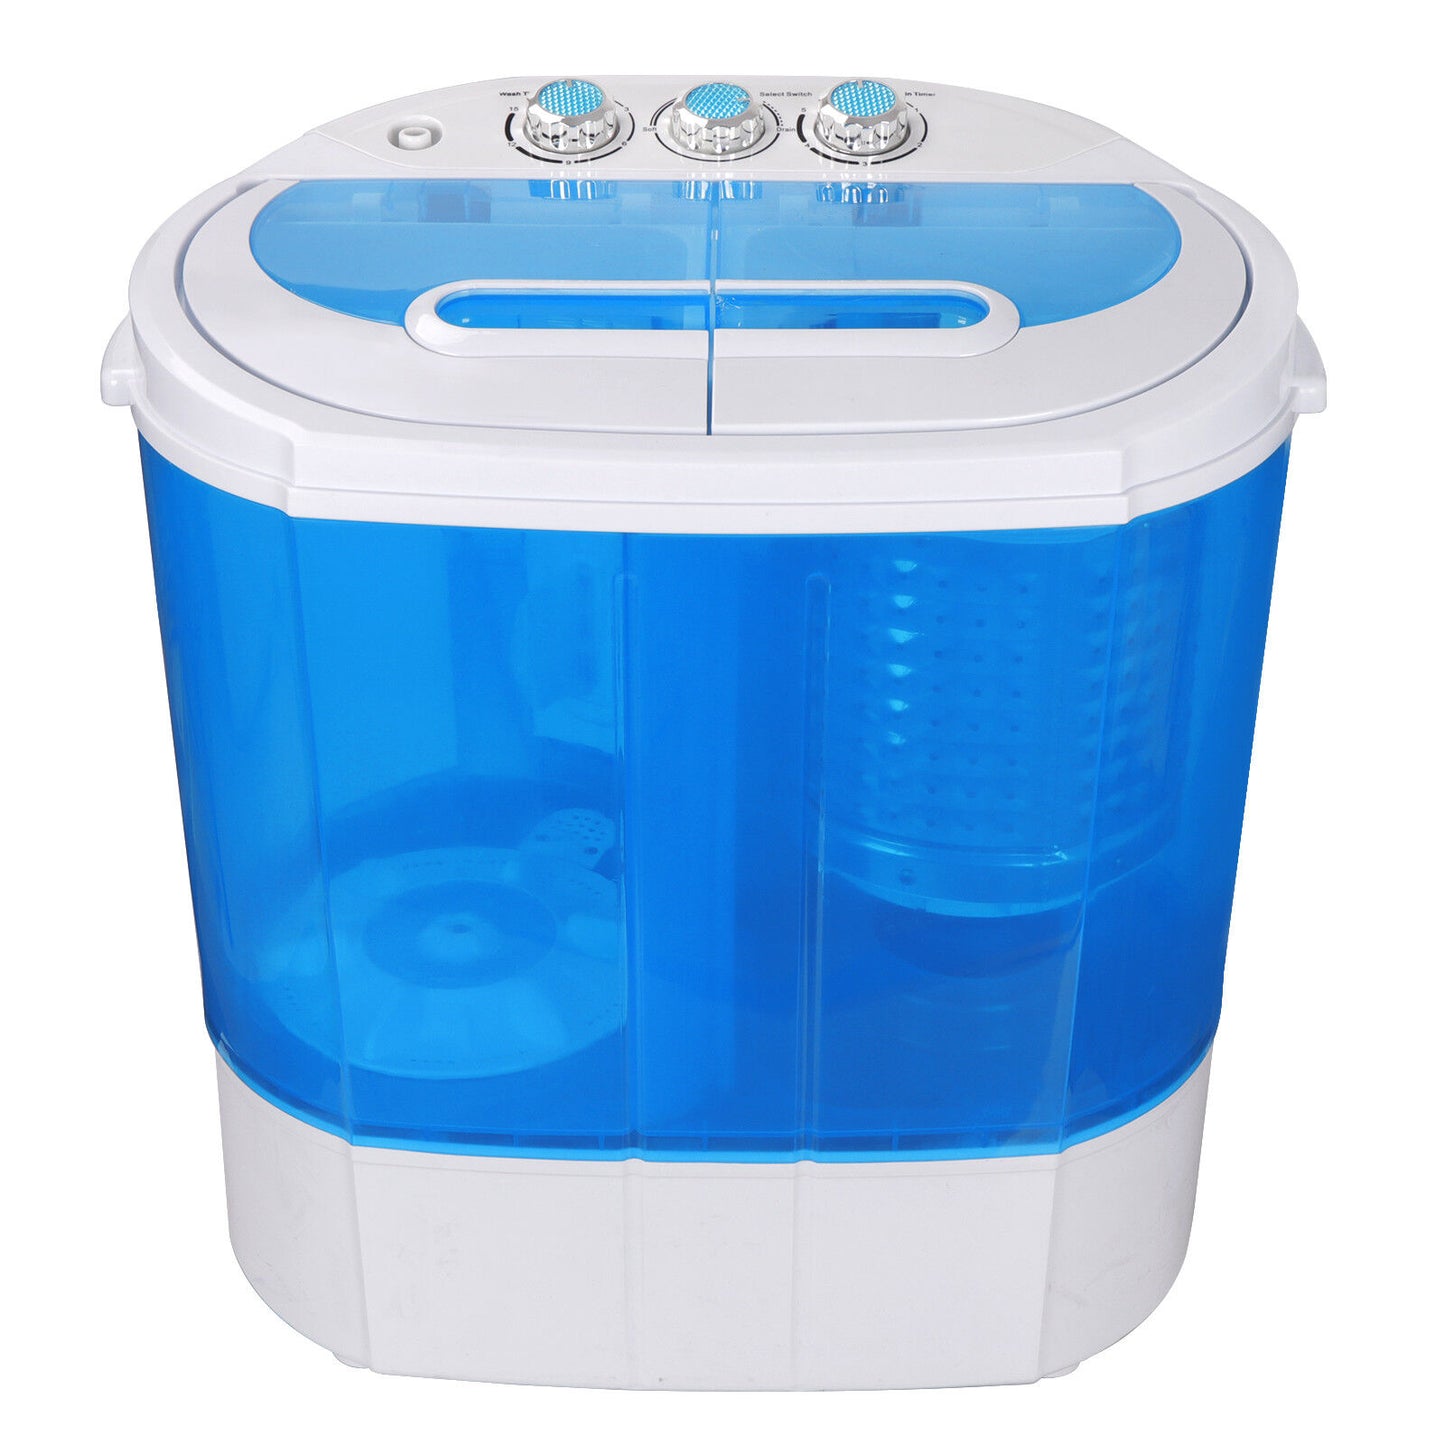 Portable Washing Machine Compact lightweight 10lbs Washer w/ Spin Cycle Dryer